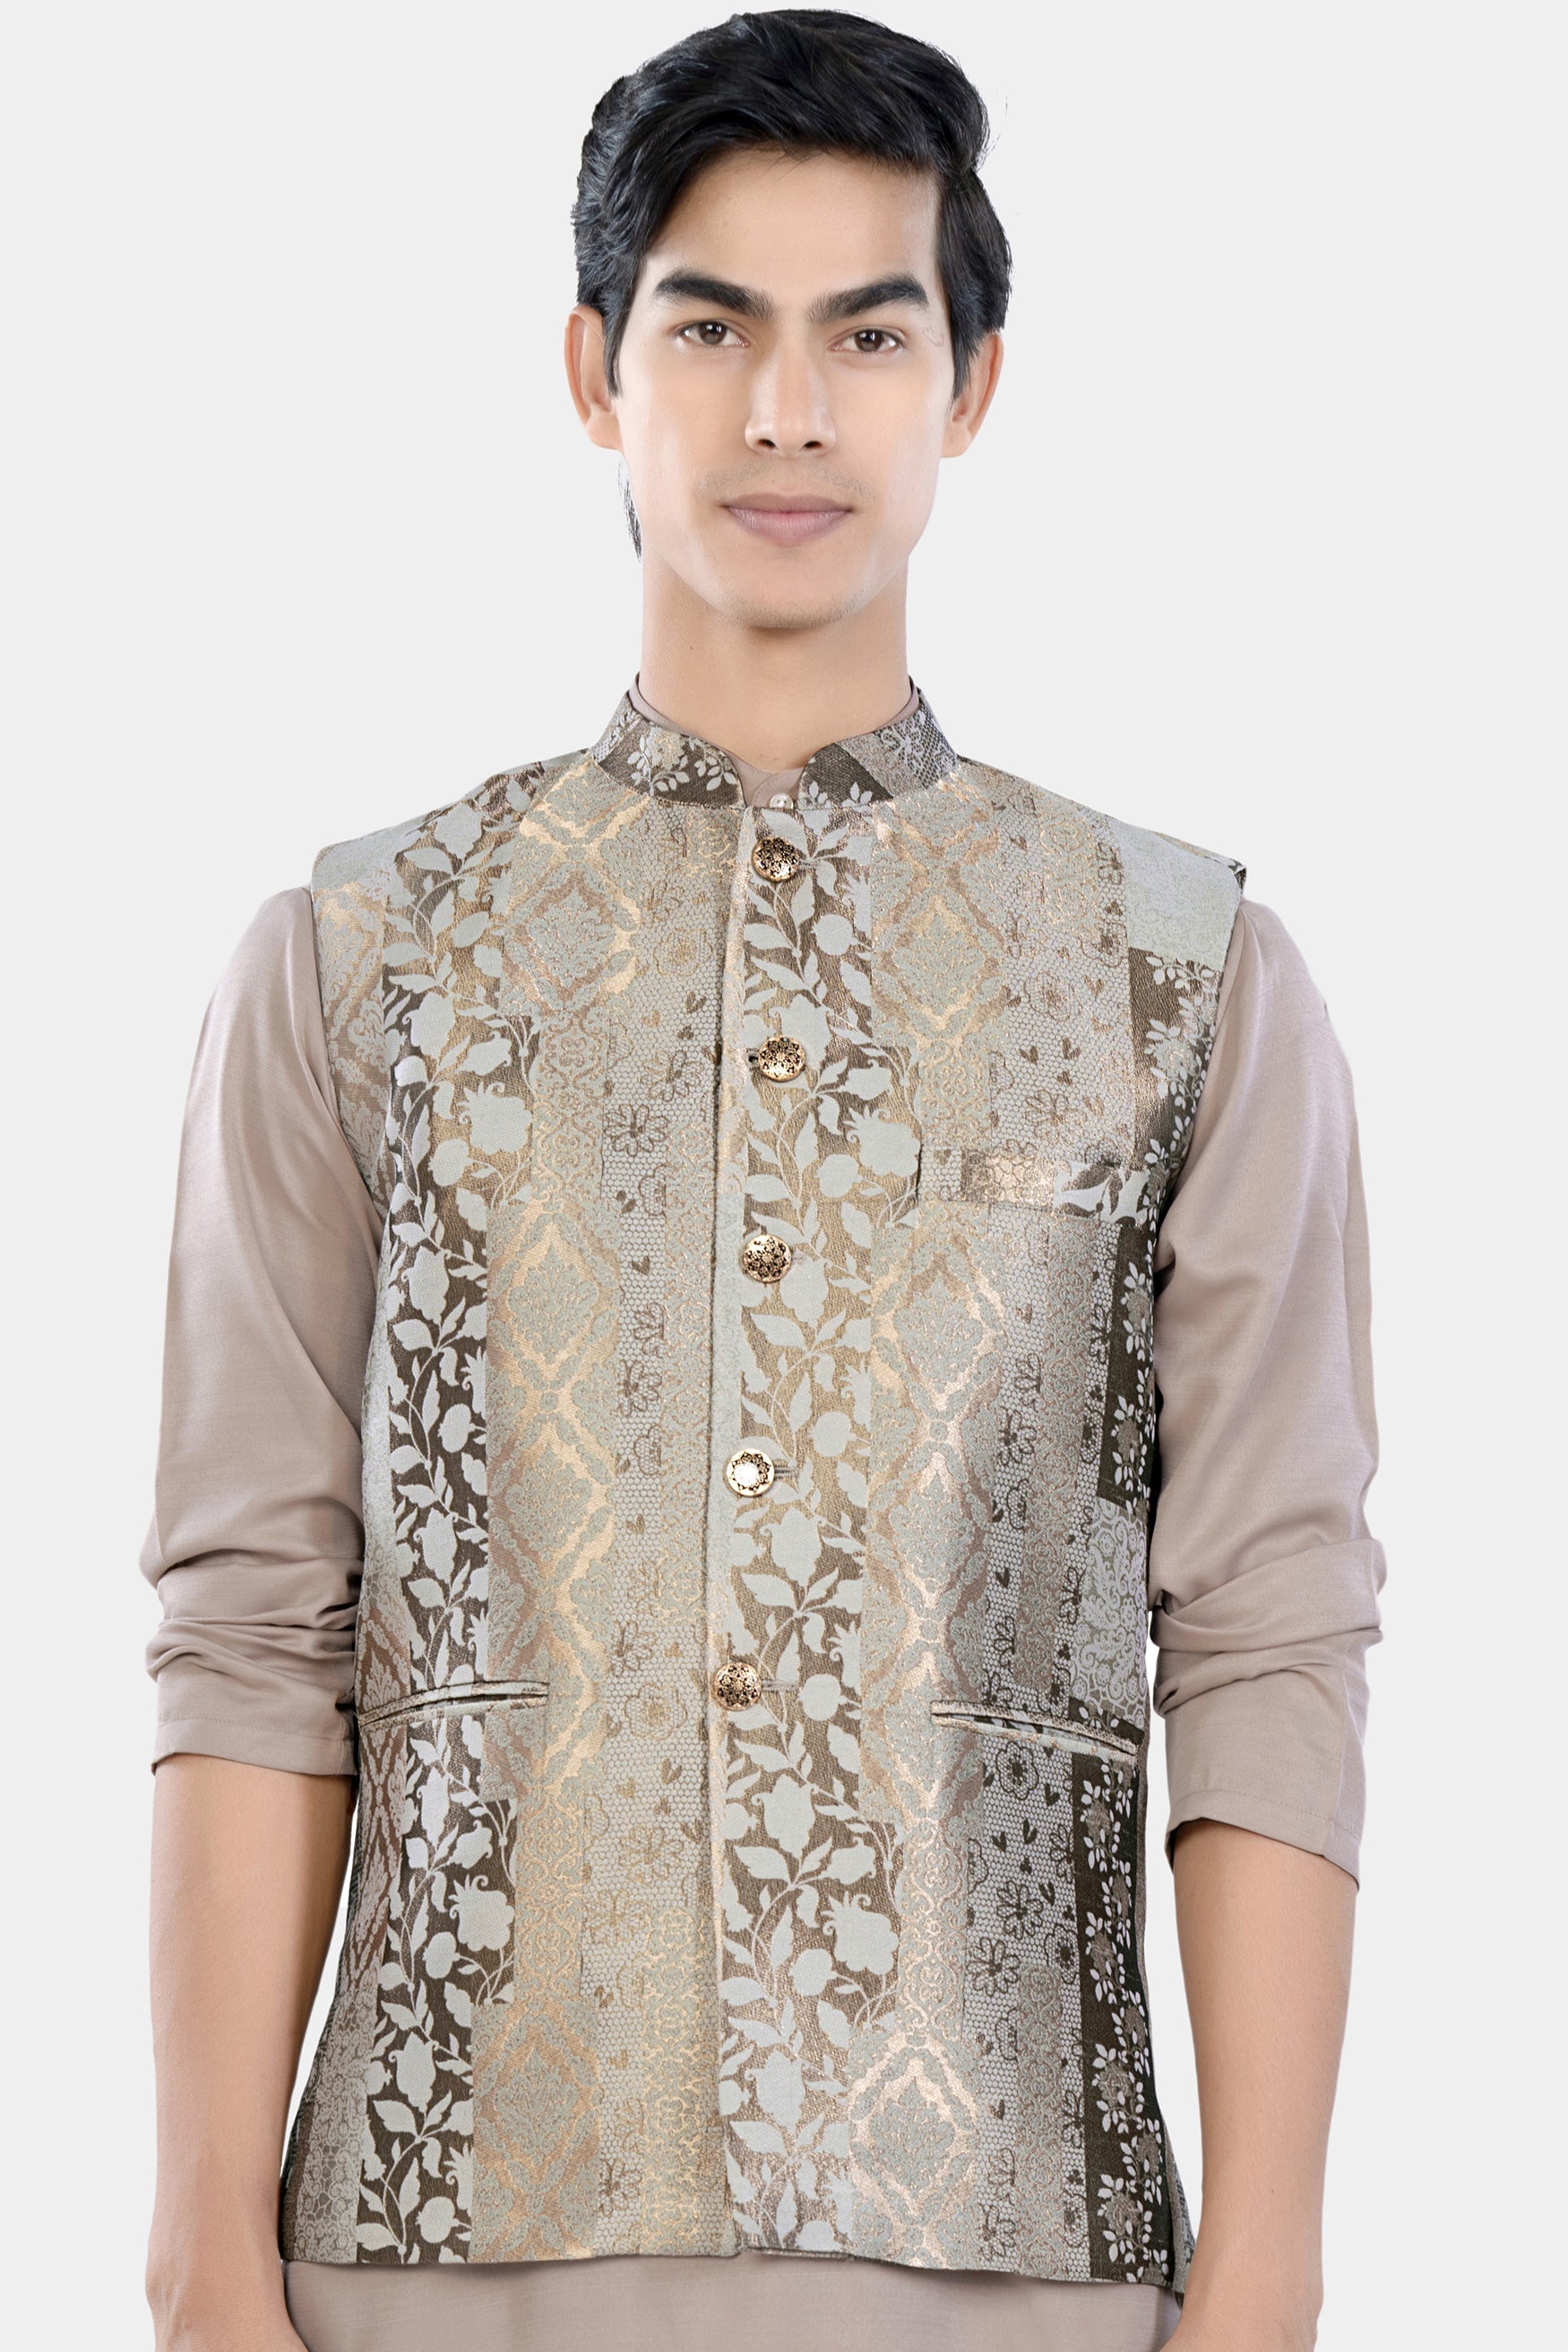 Nomad and Armadillo Brown Geometric Jacquard Textured Designer Nehru Jacket WC3478-36,  WC3478-38,  WC3478-40,  WC3478-42,  WC3478-44,  WC3478-46,  WC3478-48,  WC3478-50,  WC3478-52,  WC3478-54,  WC3478-56,  WC3478-58,  WC3478-60